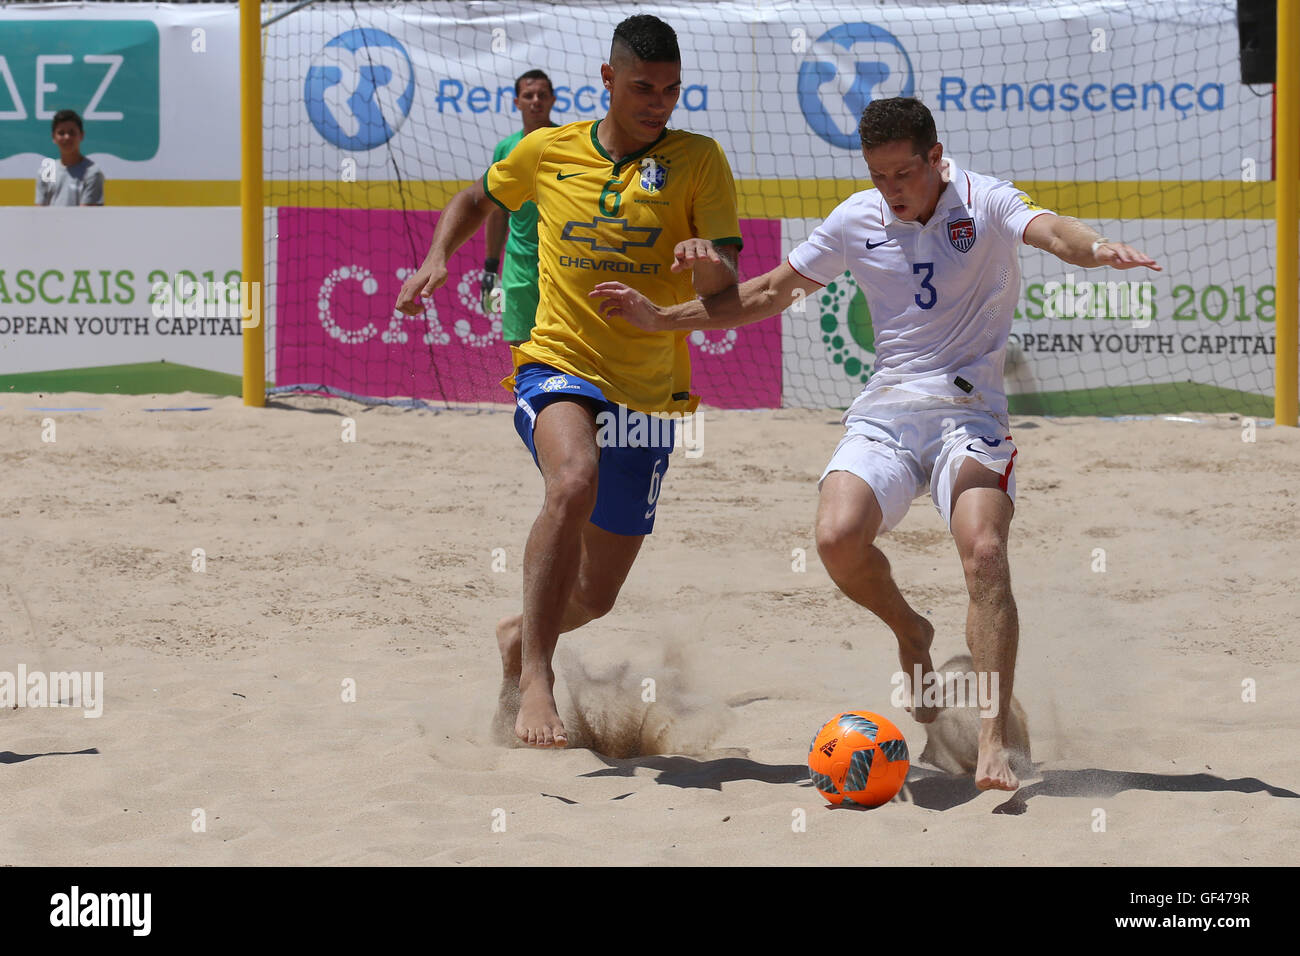 Cascais, Portugal. 29th July, 2016. United States forward Feld (3) and Brazil's forward Lucao (6) fighting for the ball Credit:  Alexandre de Sousa/Alamy Live News Stock Photo